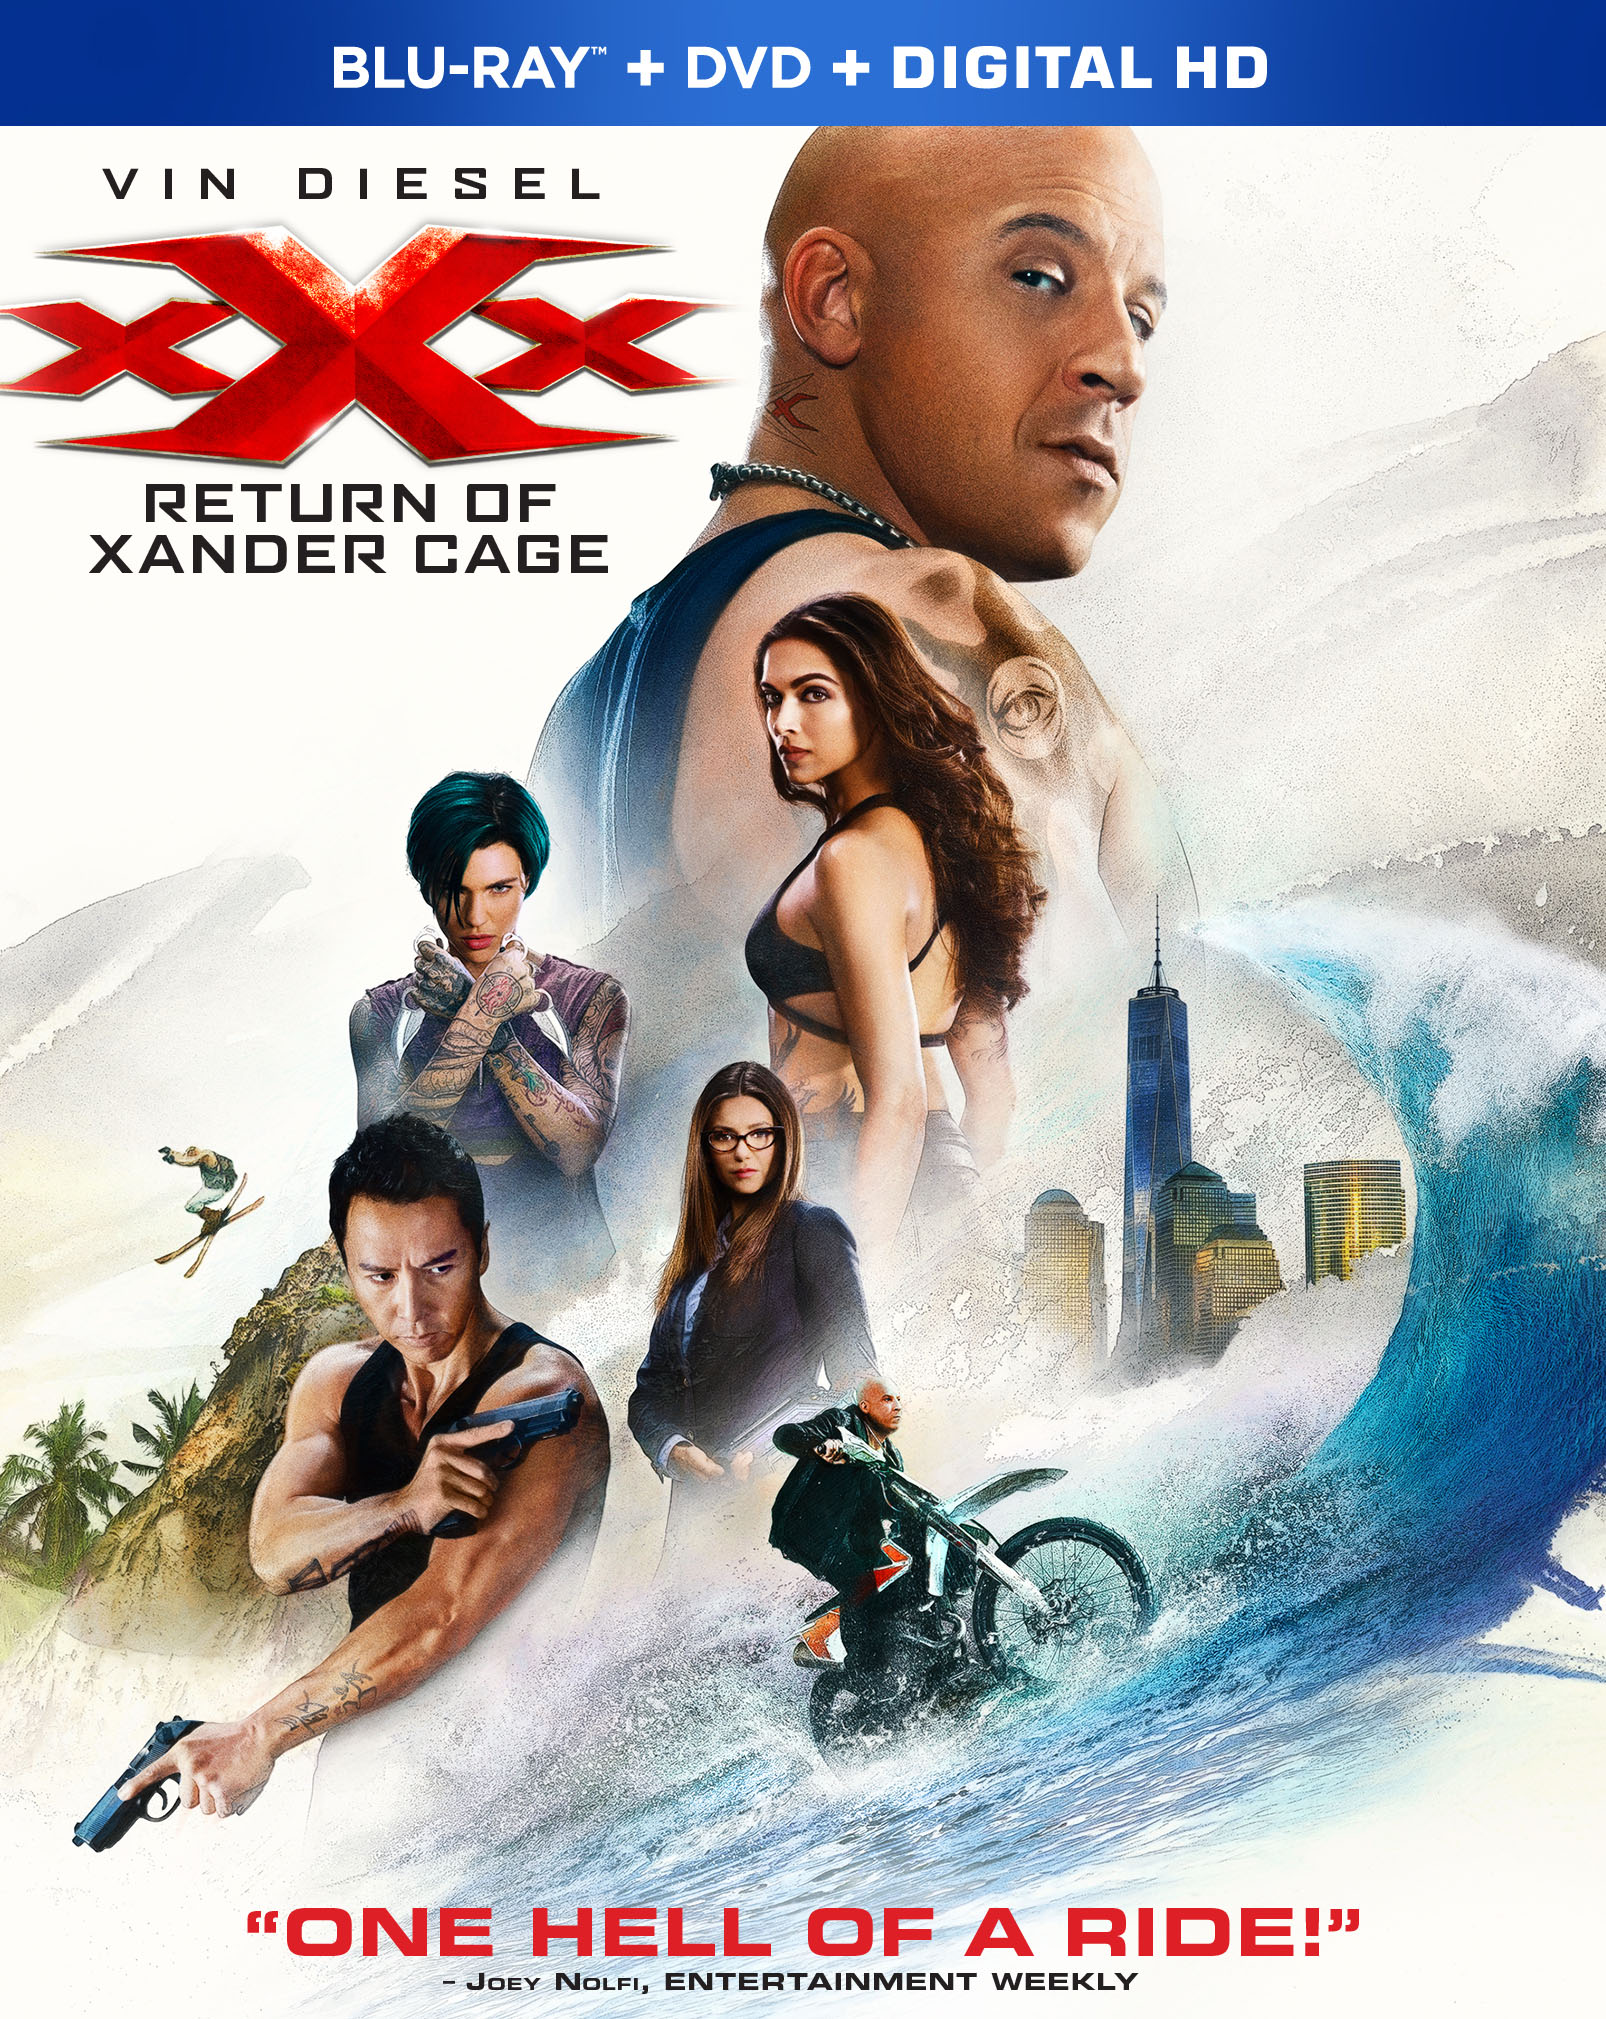 Xxx the return of xander cage dvd